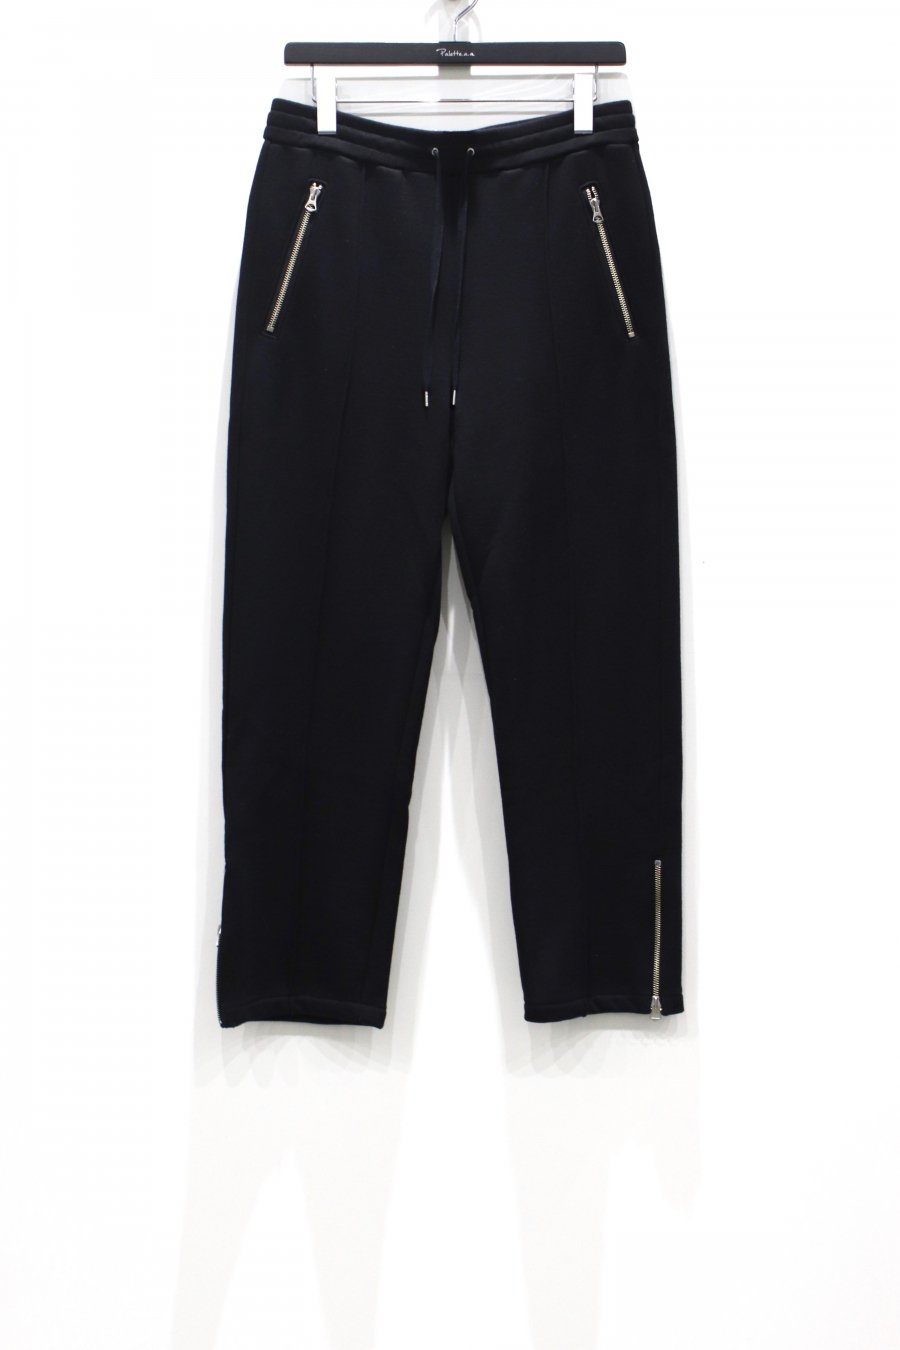 SOLARIS  SWEAT SPORT PANTS<img class='new_mark_img2' src='https://img.shop-pro.jp/img/new/icons15.gif' style='border:none;display:inline;margin:0px;padding:0px;width:auto;' />